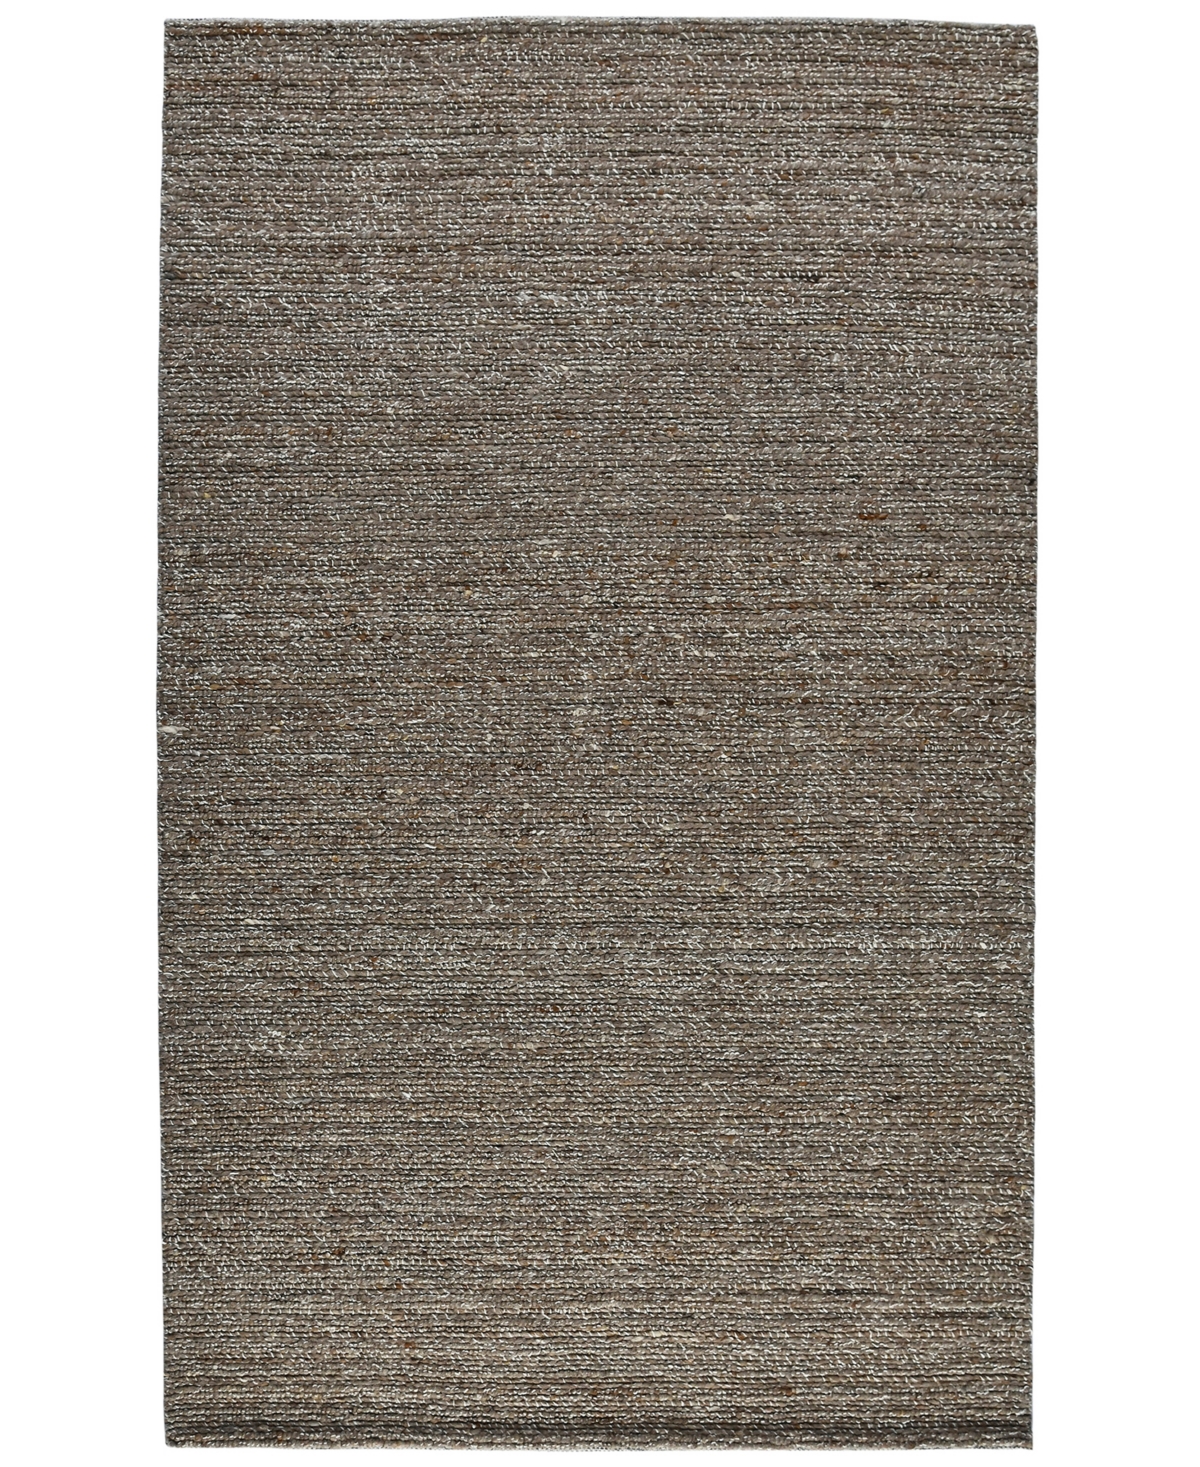 Amer Rugs Norwood Nor4 5' X 7'6" Area Rug In Camel